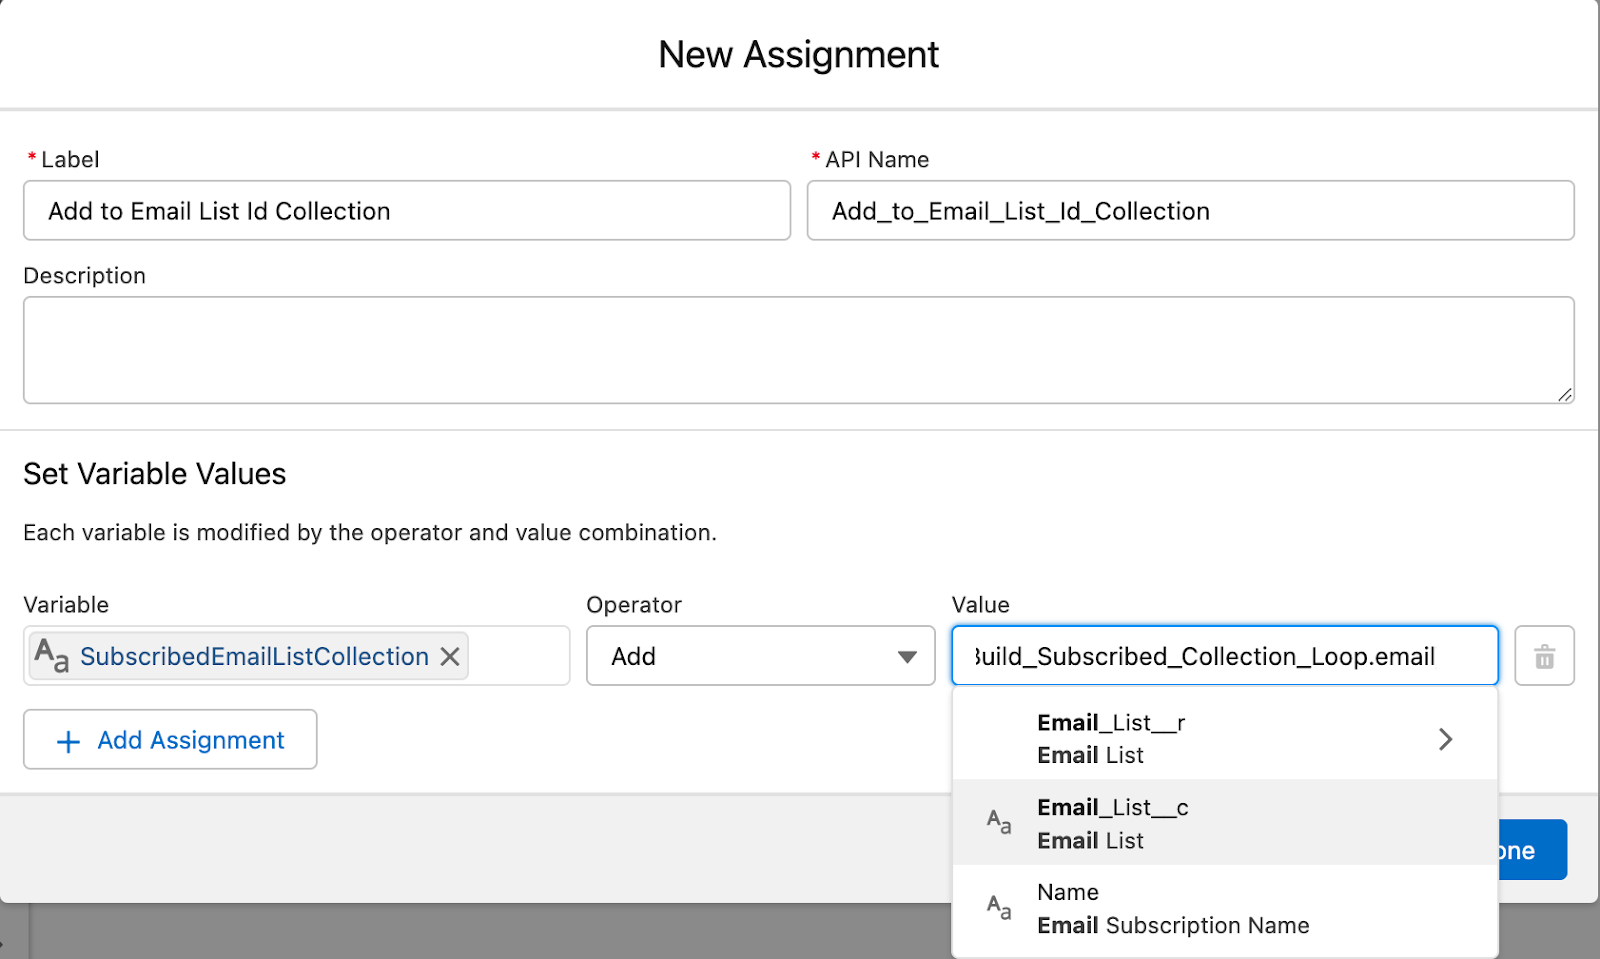 salesforce-flow-new-assignment-email-list